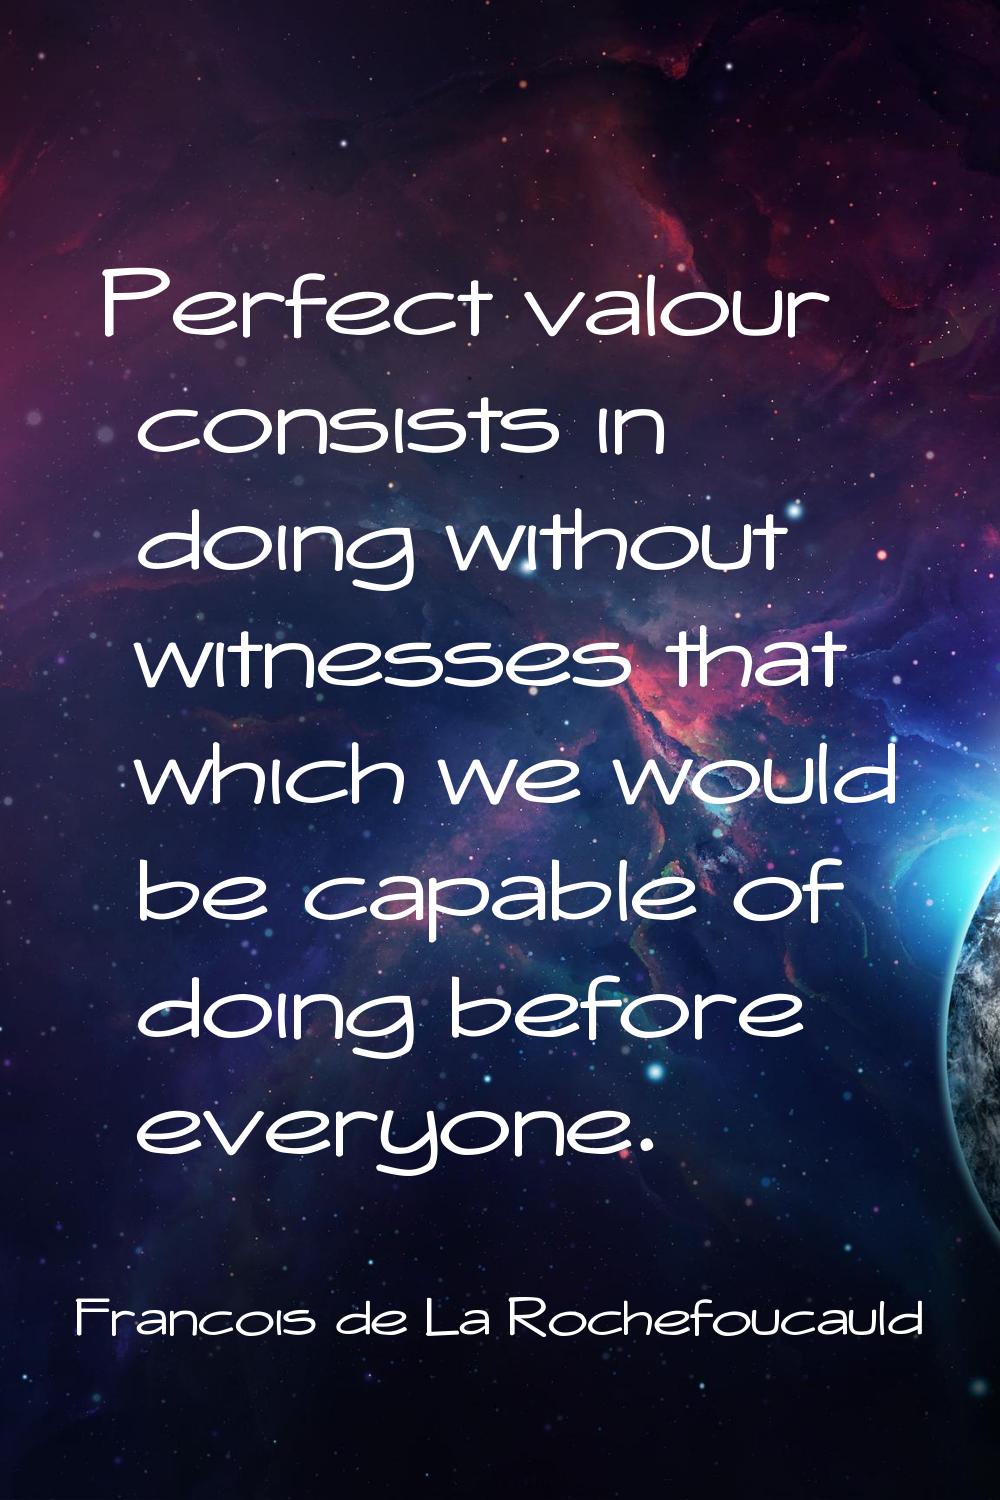 Perfect valour consists in doing without witnesses that which we would be capable of doing before e